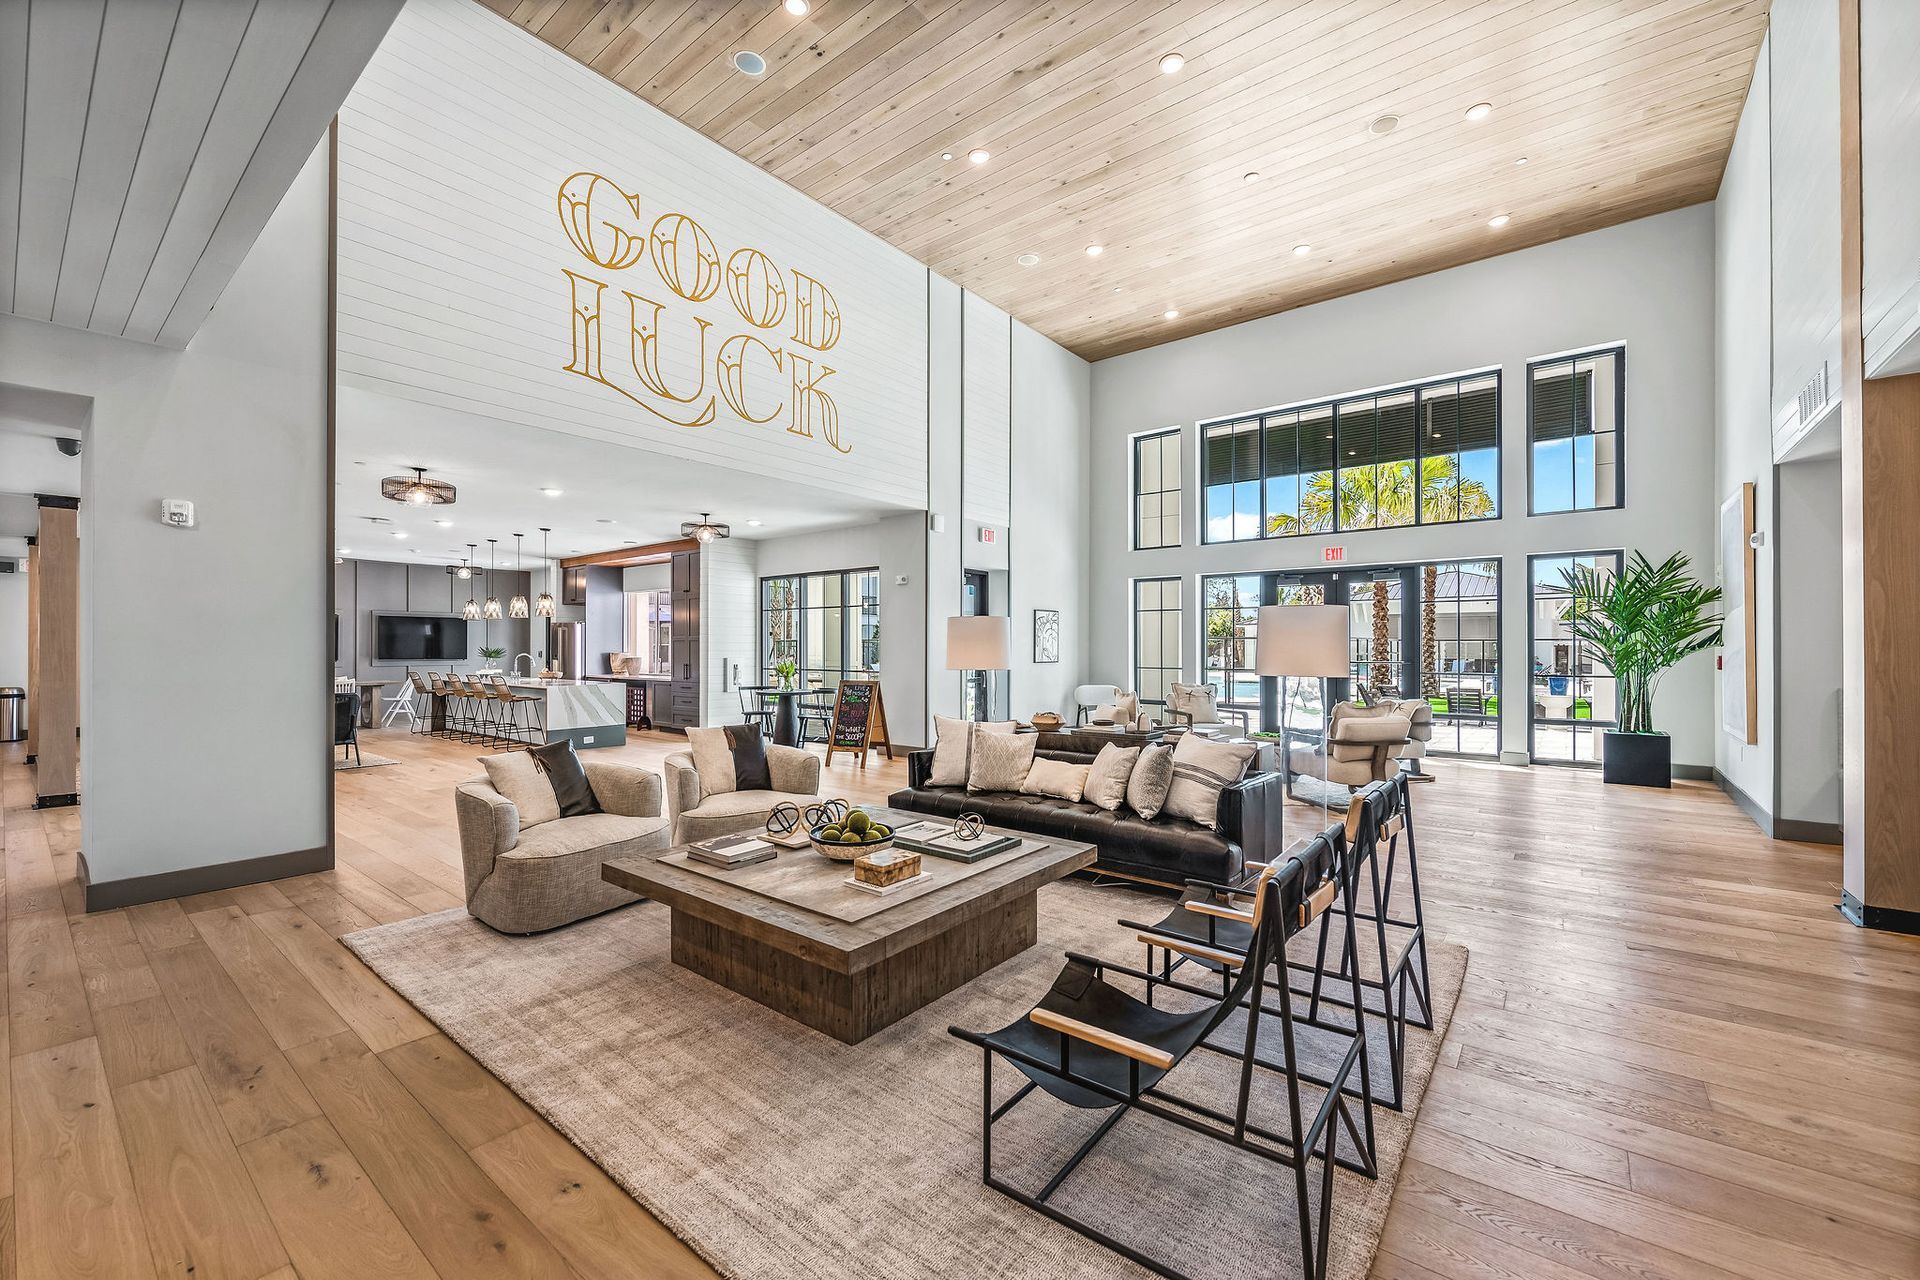 A living room filled with furniture and a sign that says good luck at Livano Nature Coast.